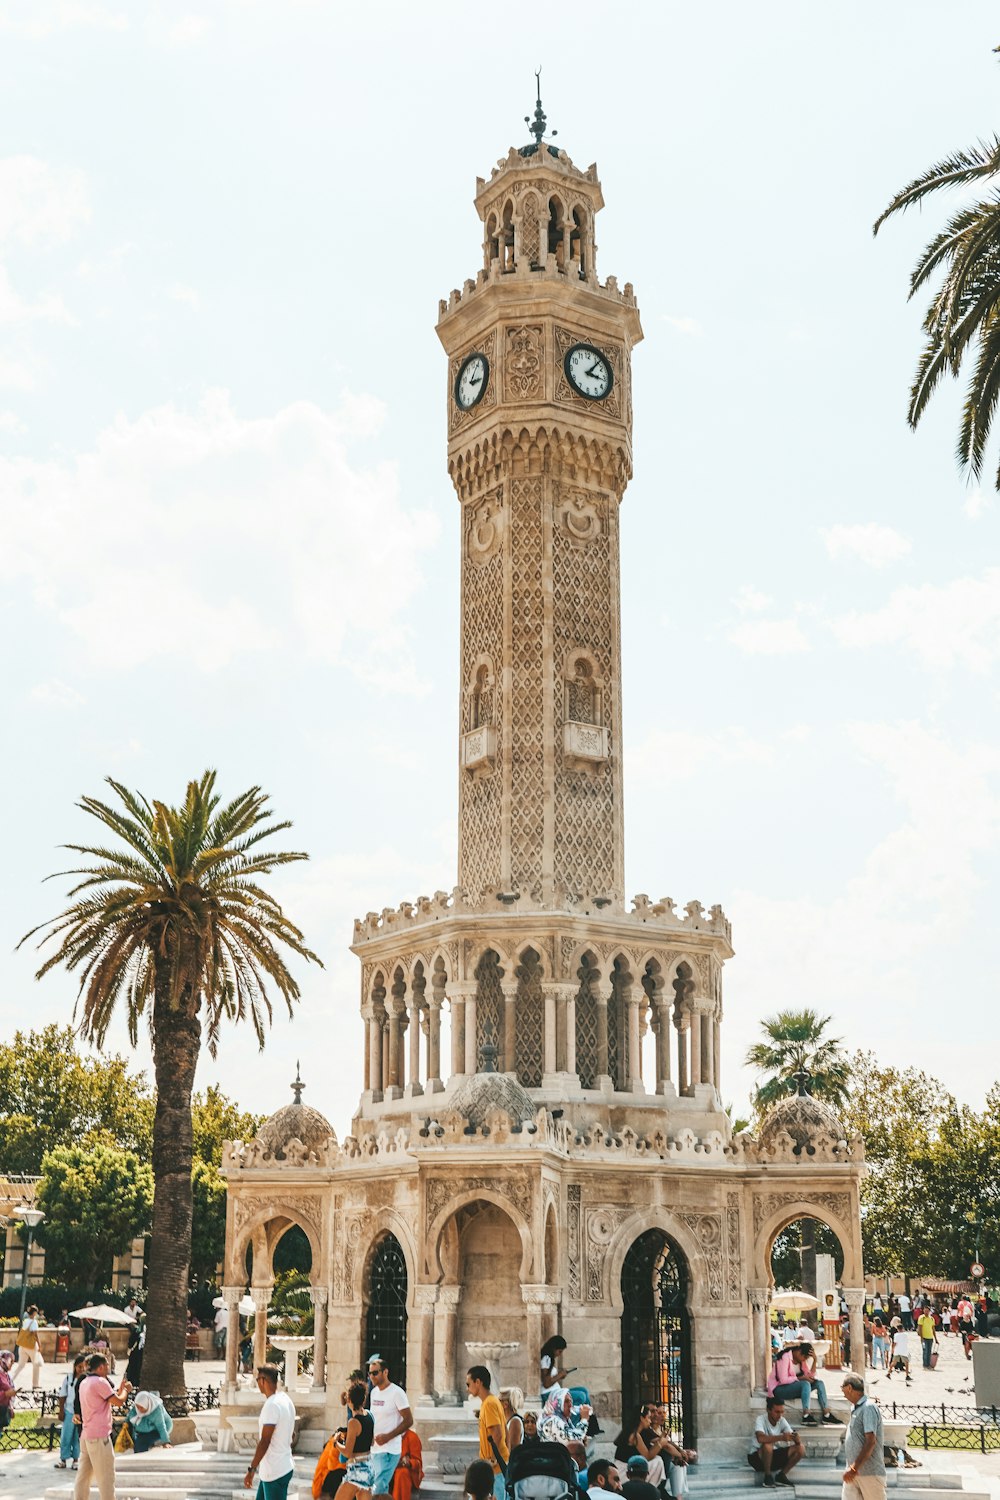 a large clock tower stands tall with İzmir Clock Tower in the background